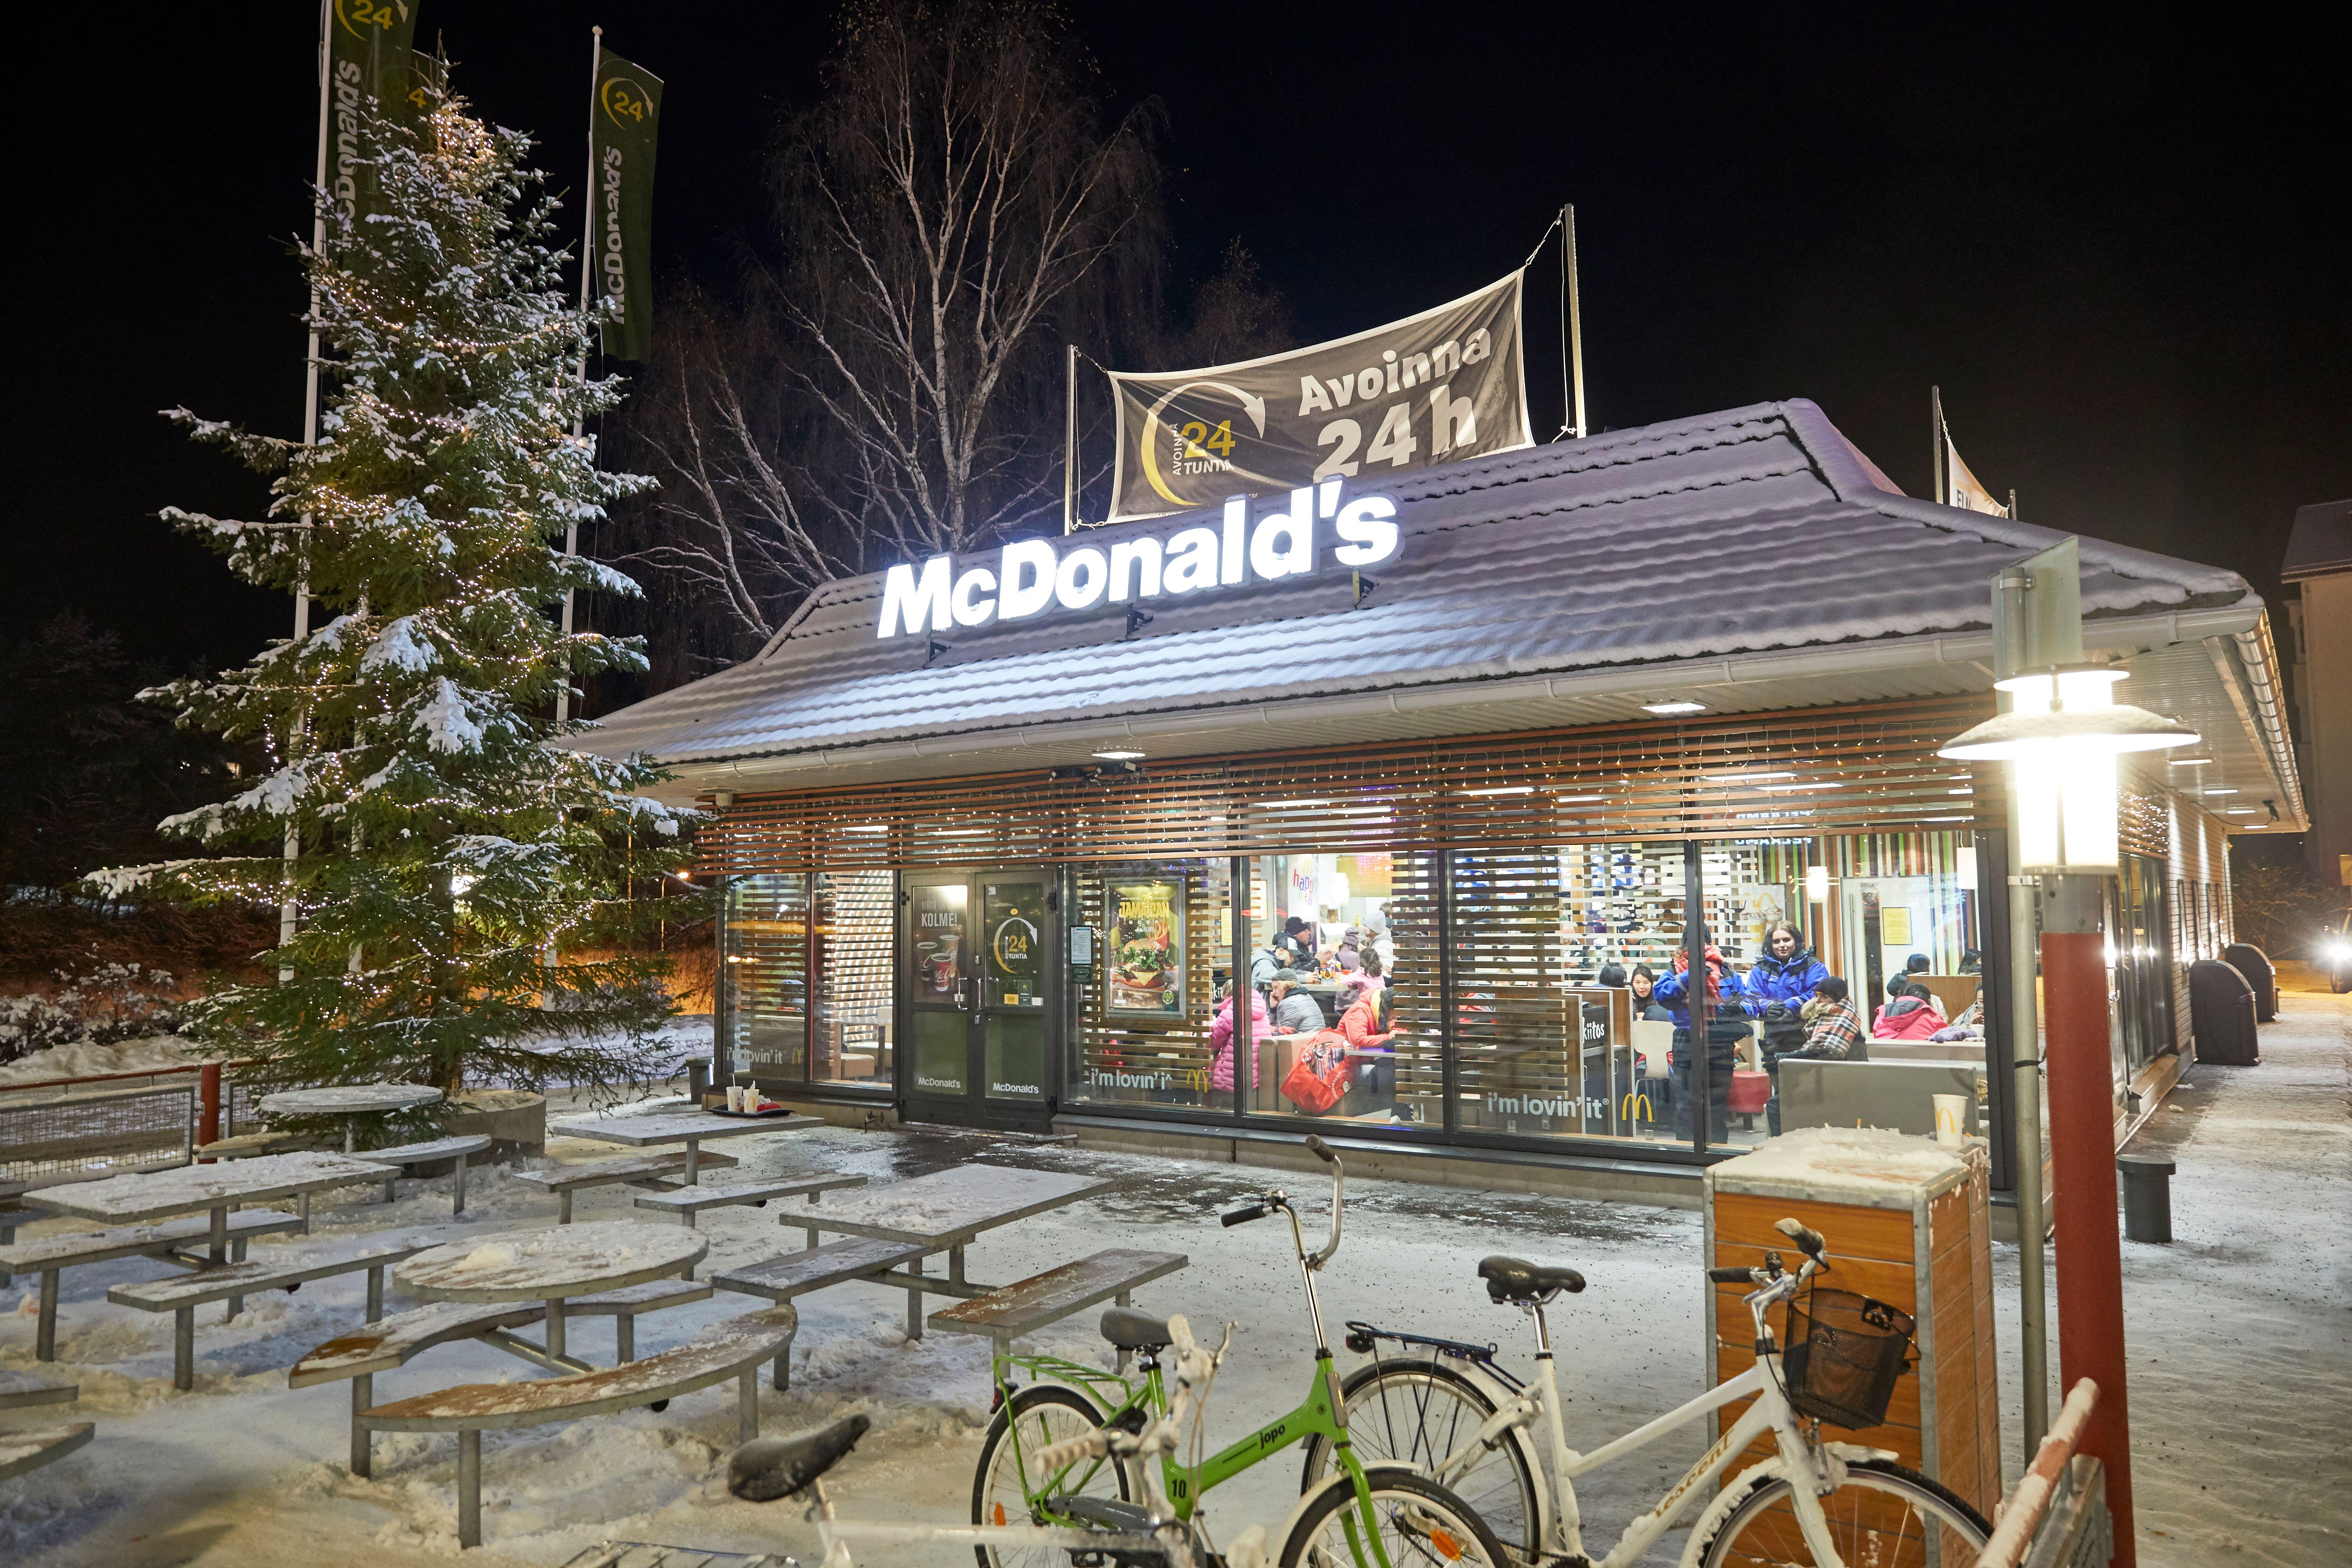 The world's northernmost McDonald's sits in Lapland